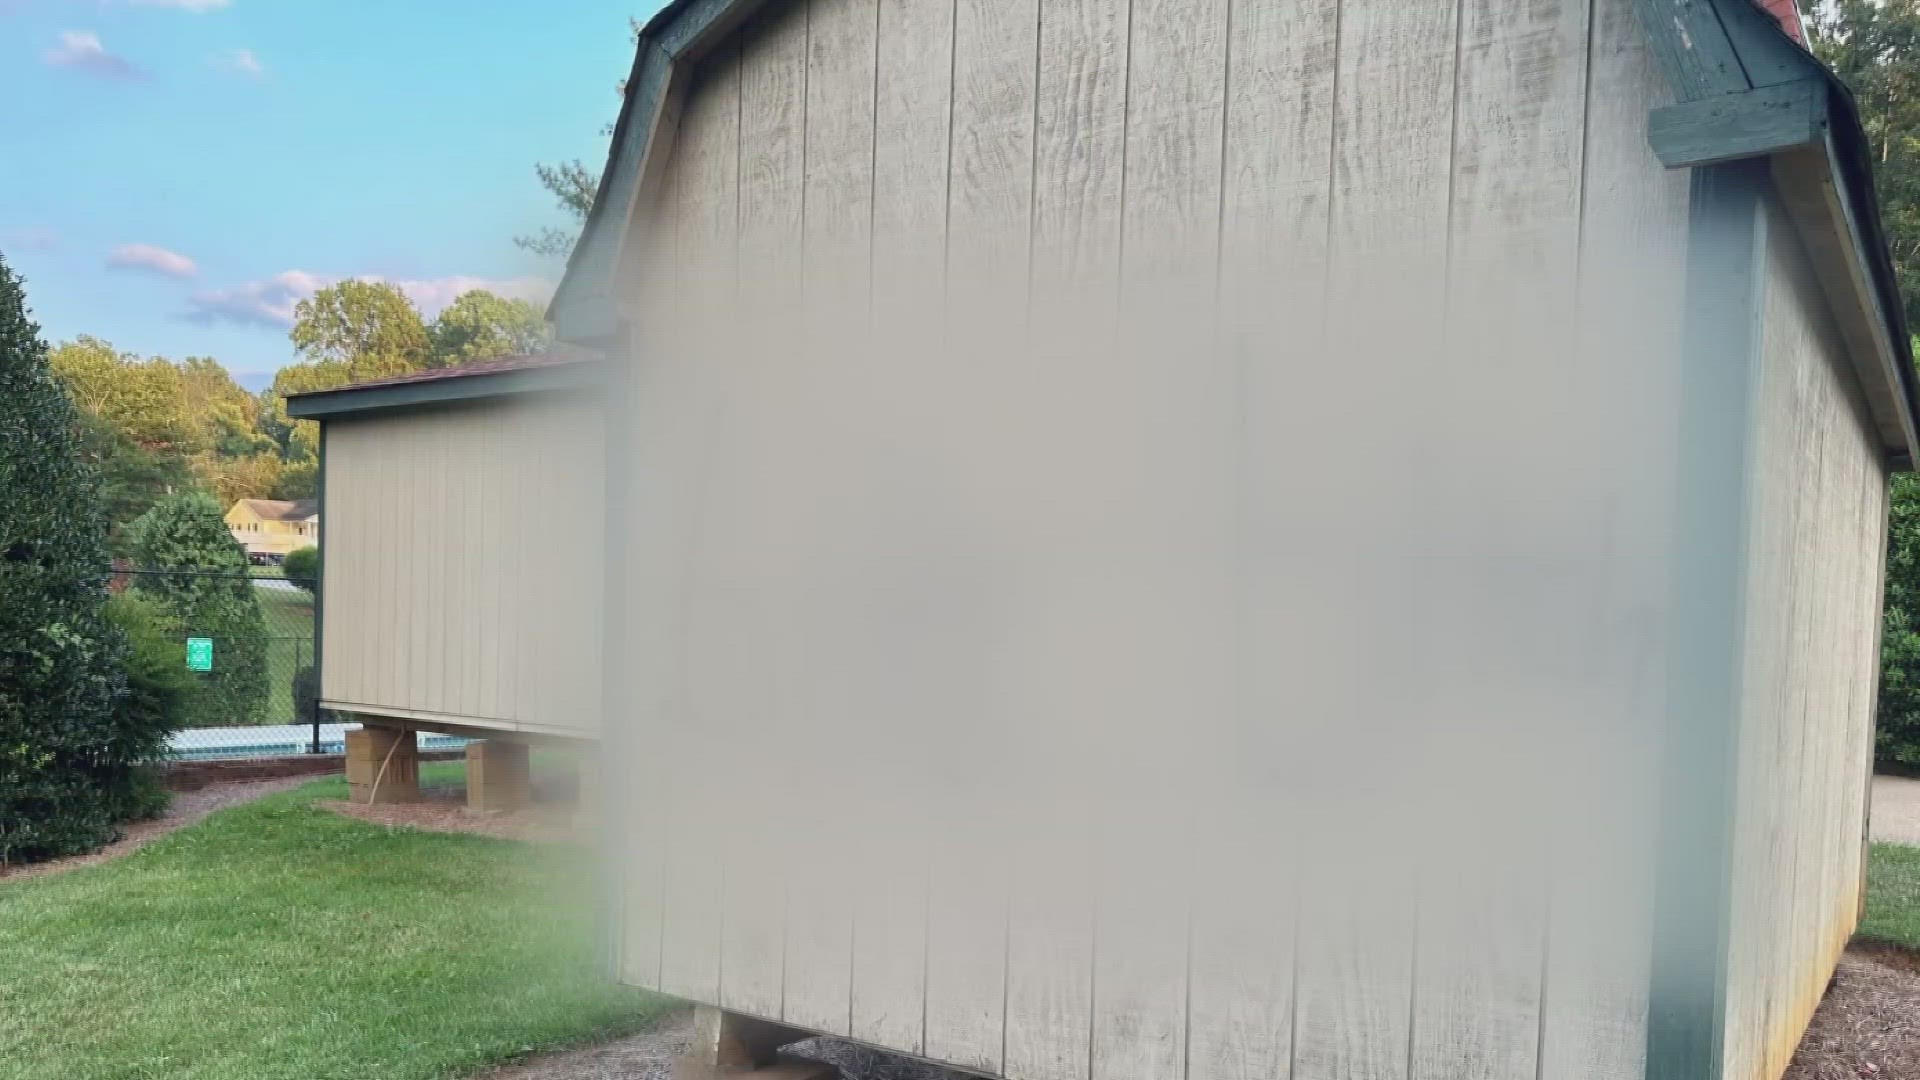 Kim Jennings said someone sprayed graffiti on a shed at the apartment, days after the video went viral.